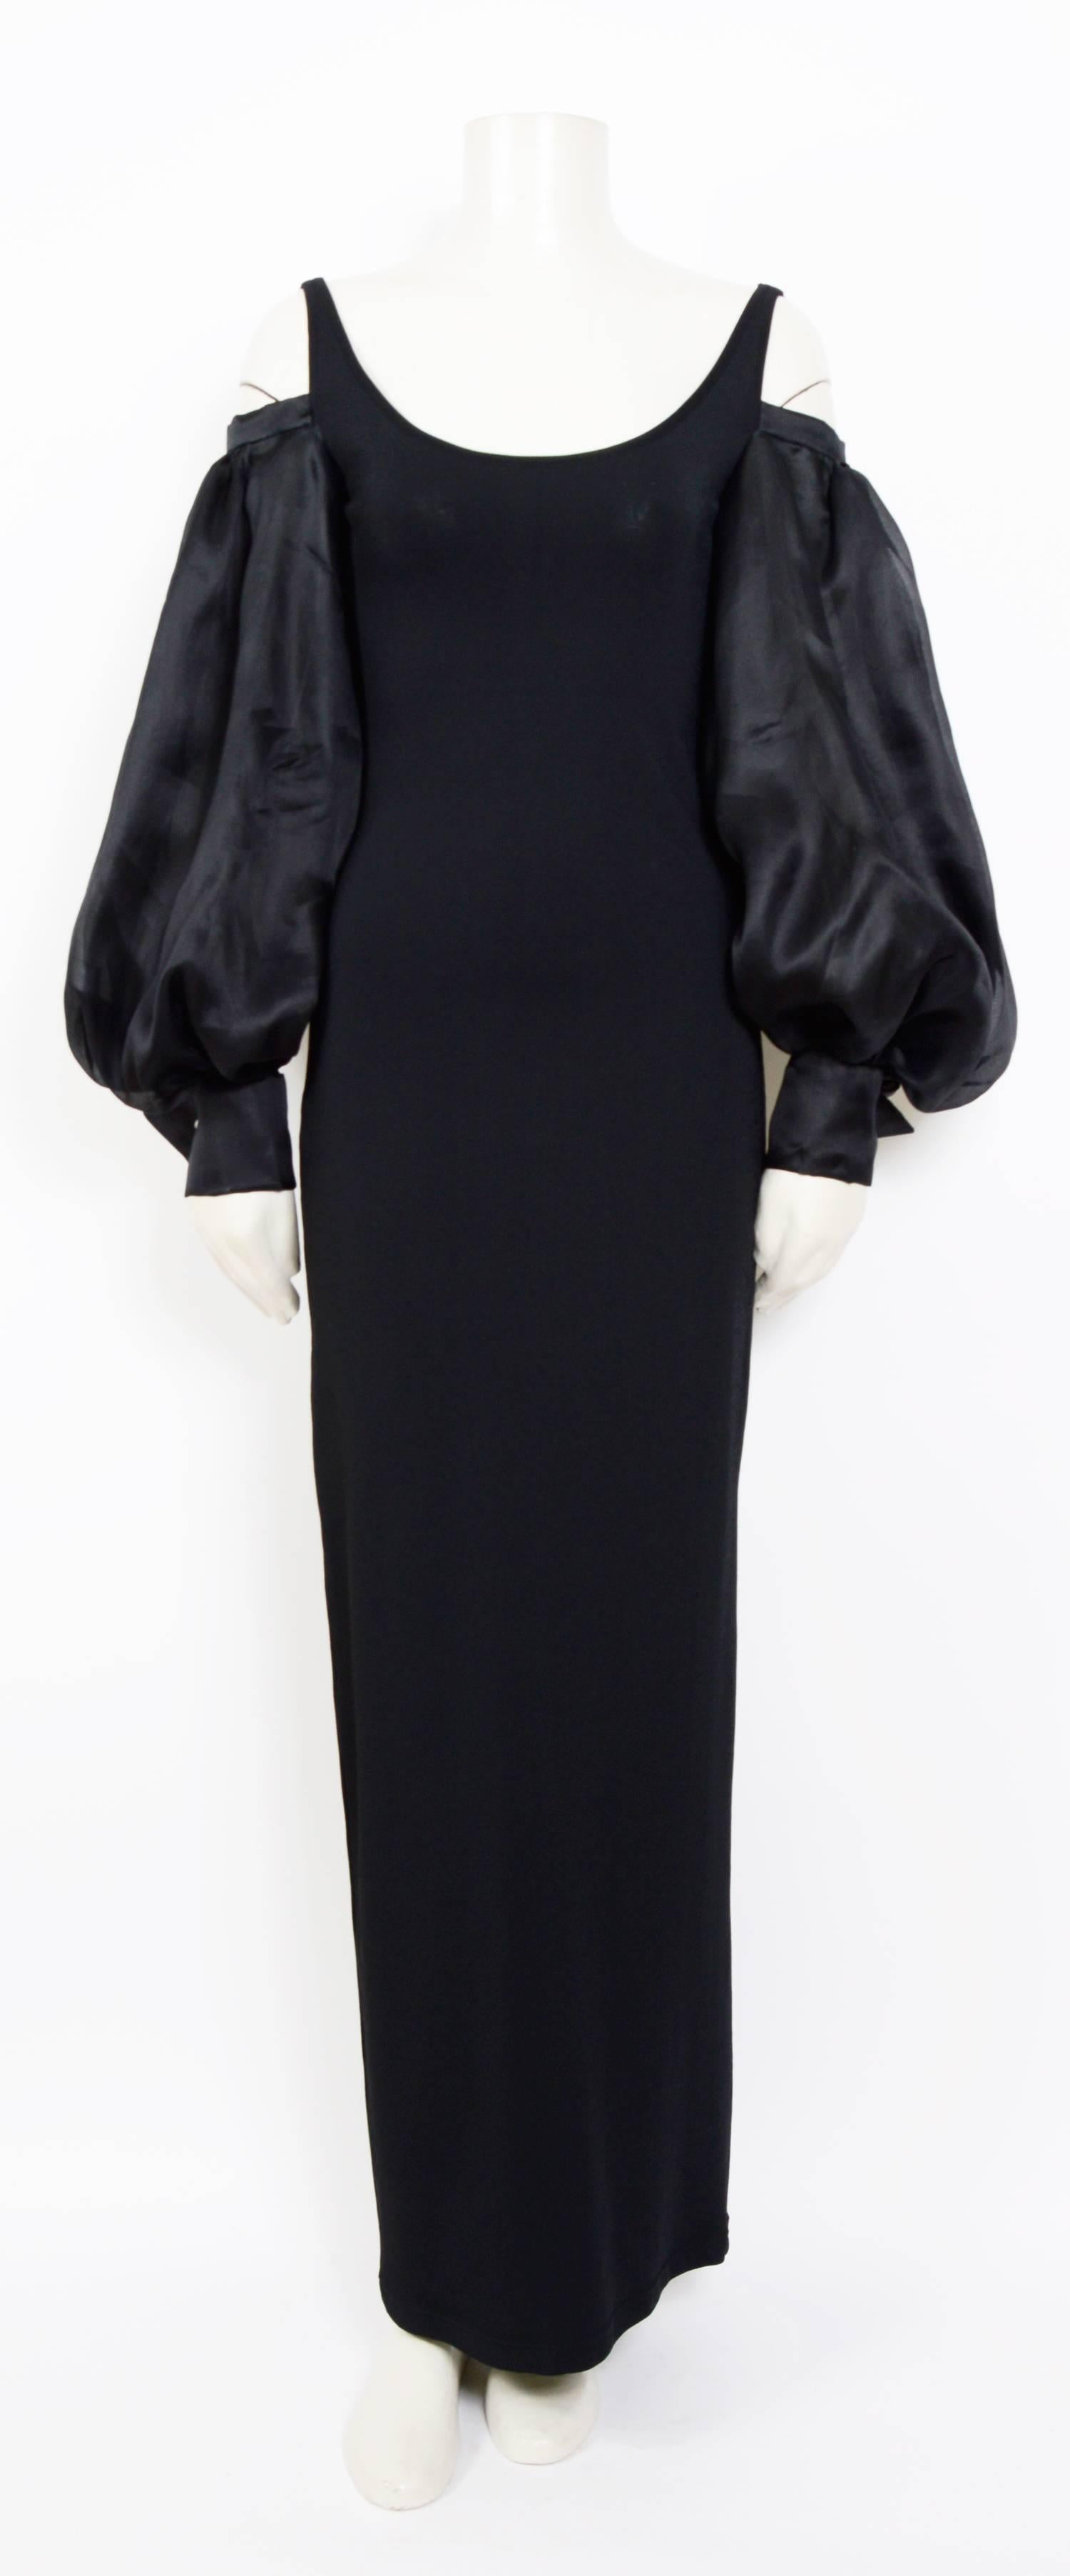 Christian Dior by Gianfranco Ferre 1994 black dress and billowing sleeves   2